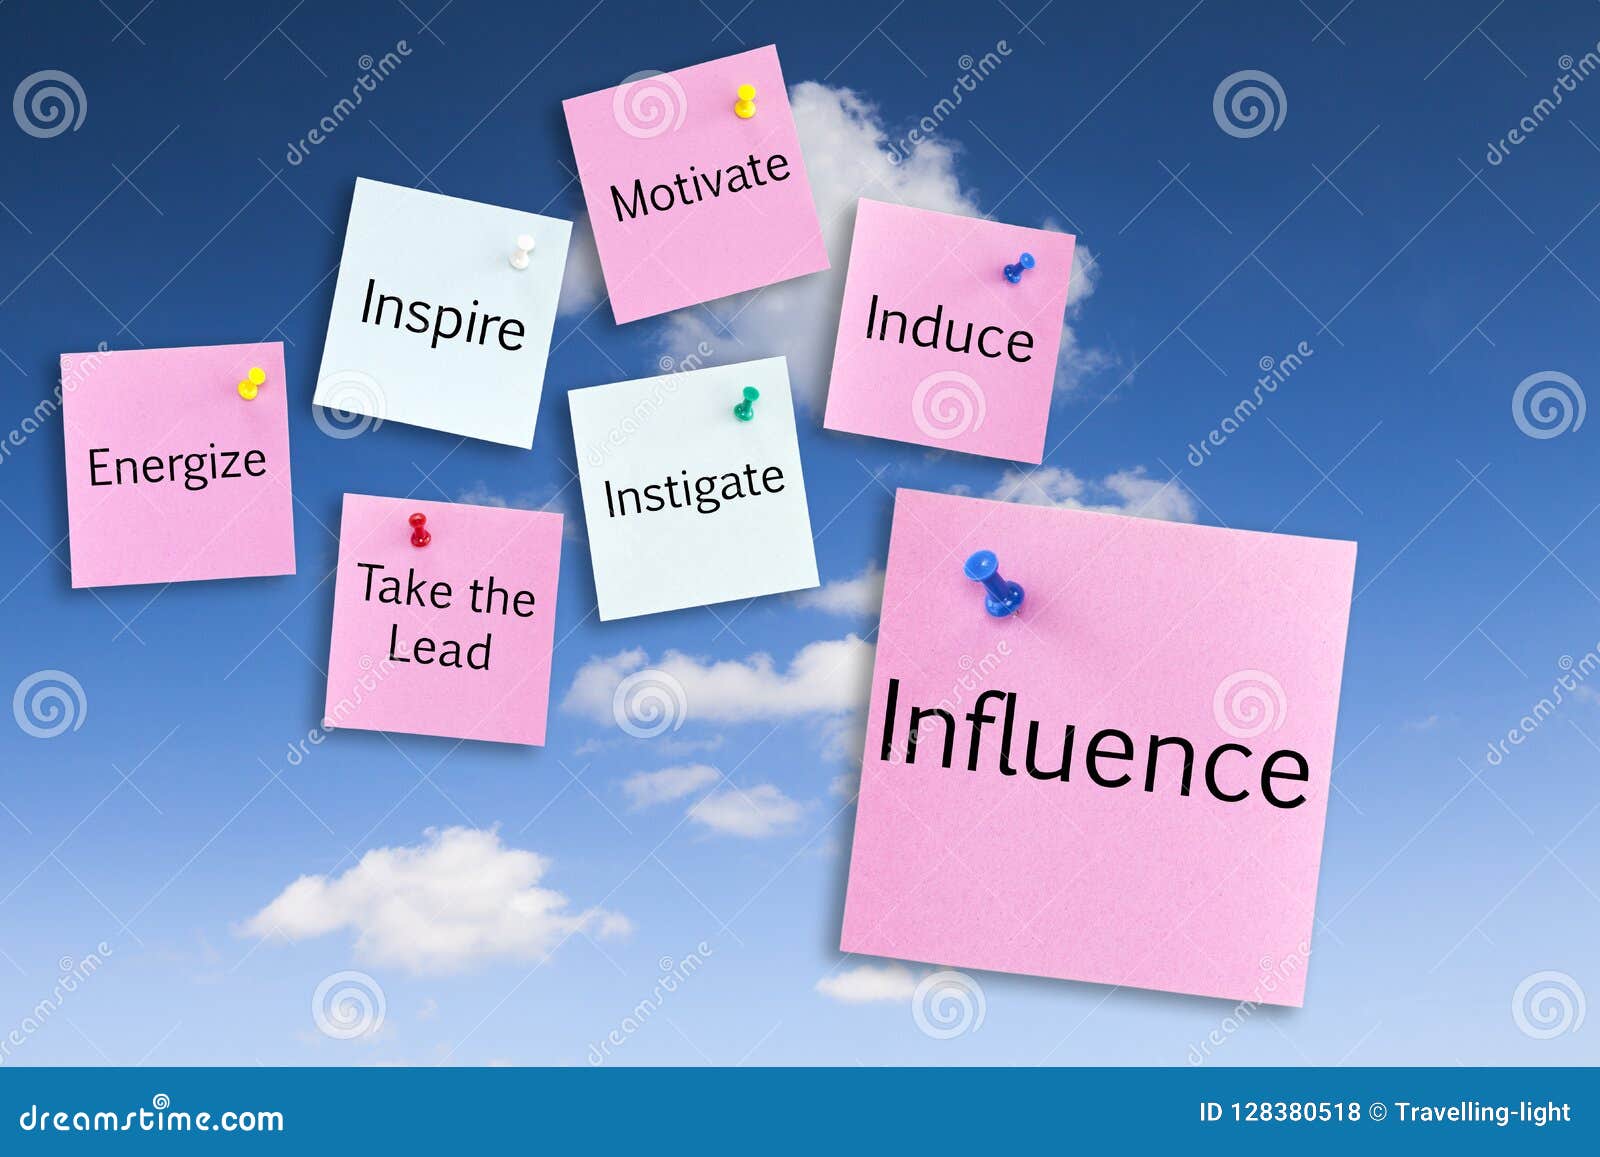 influence concept notes on sky